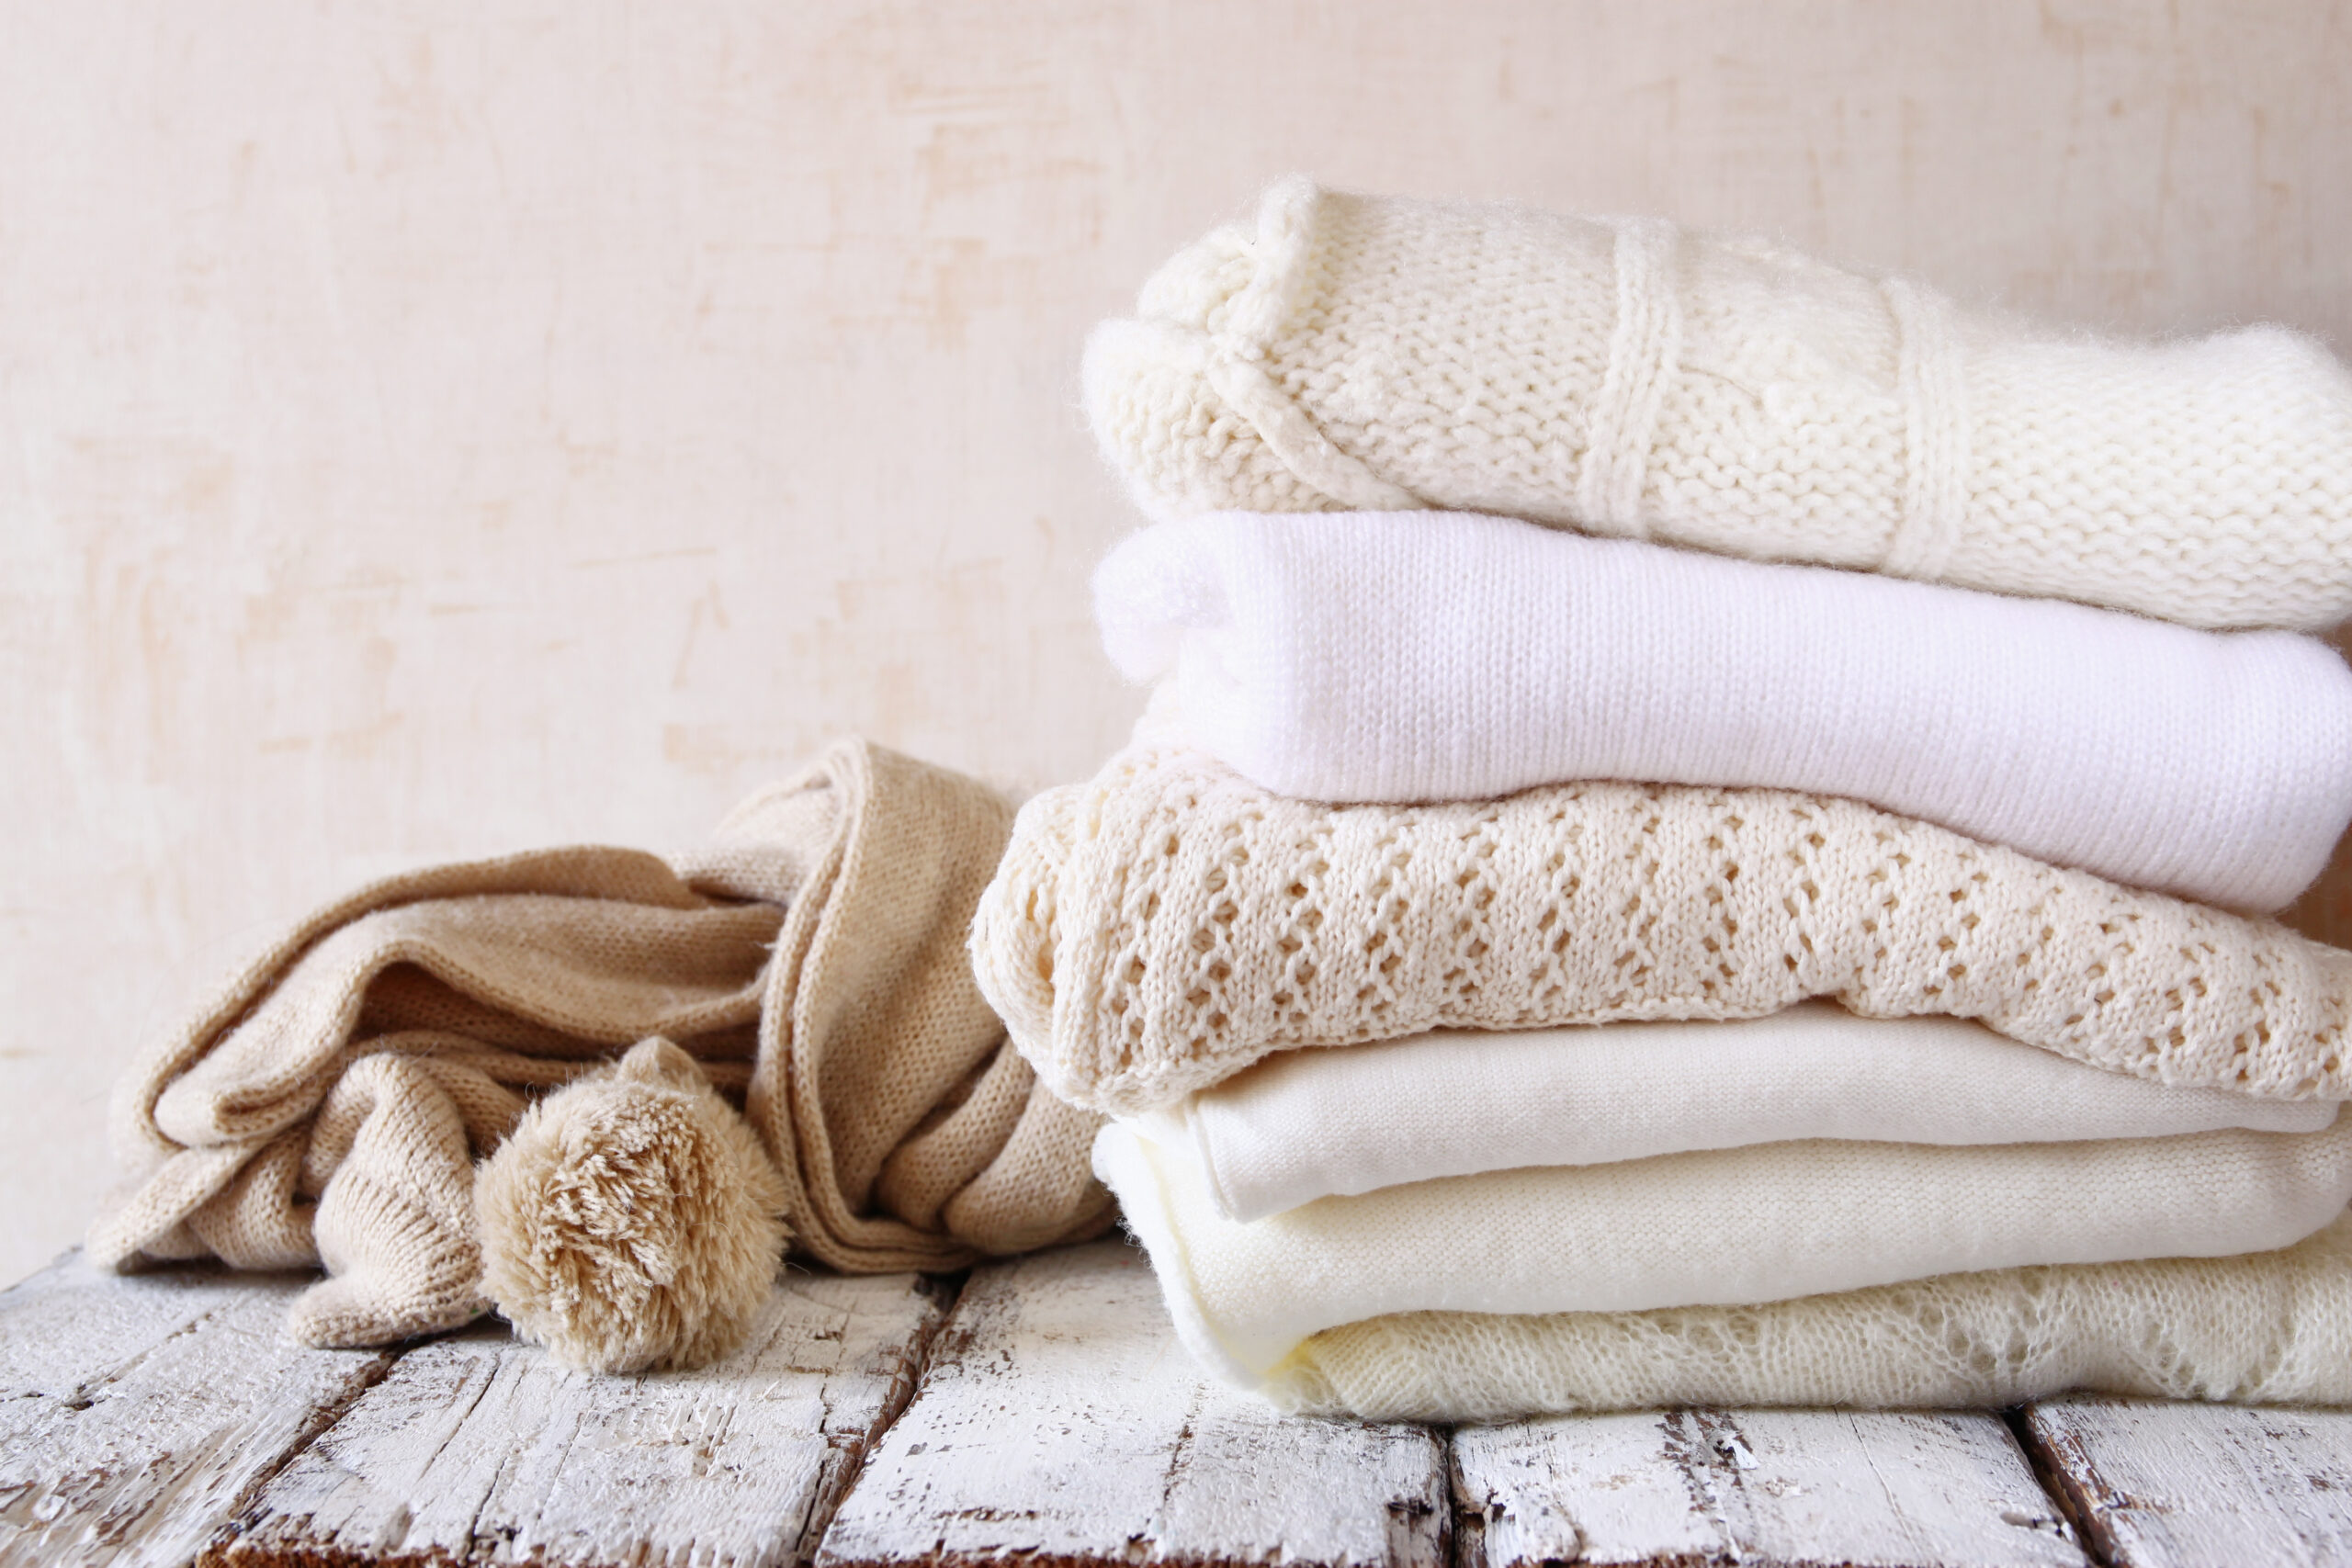 How to Wash and Care for Knitwear - ZIPS